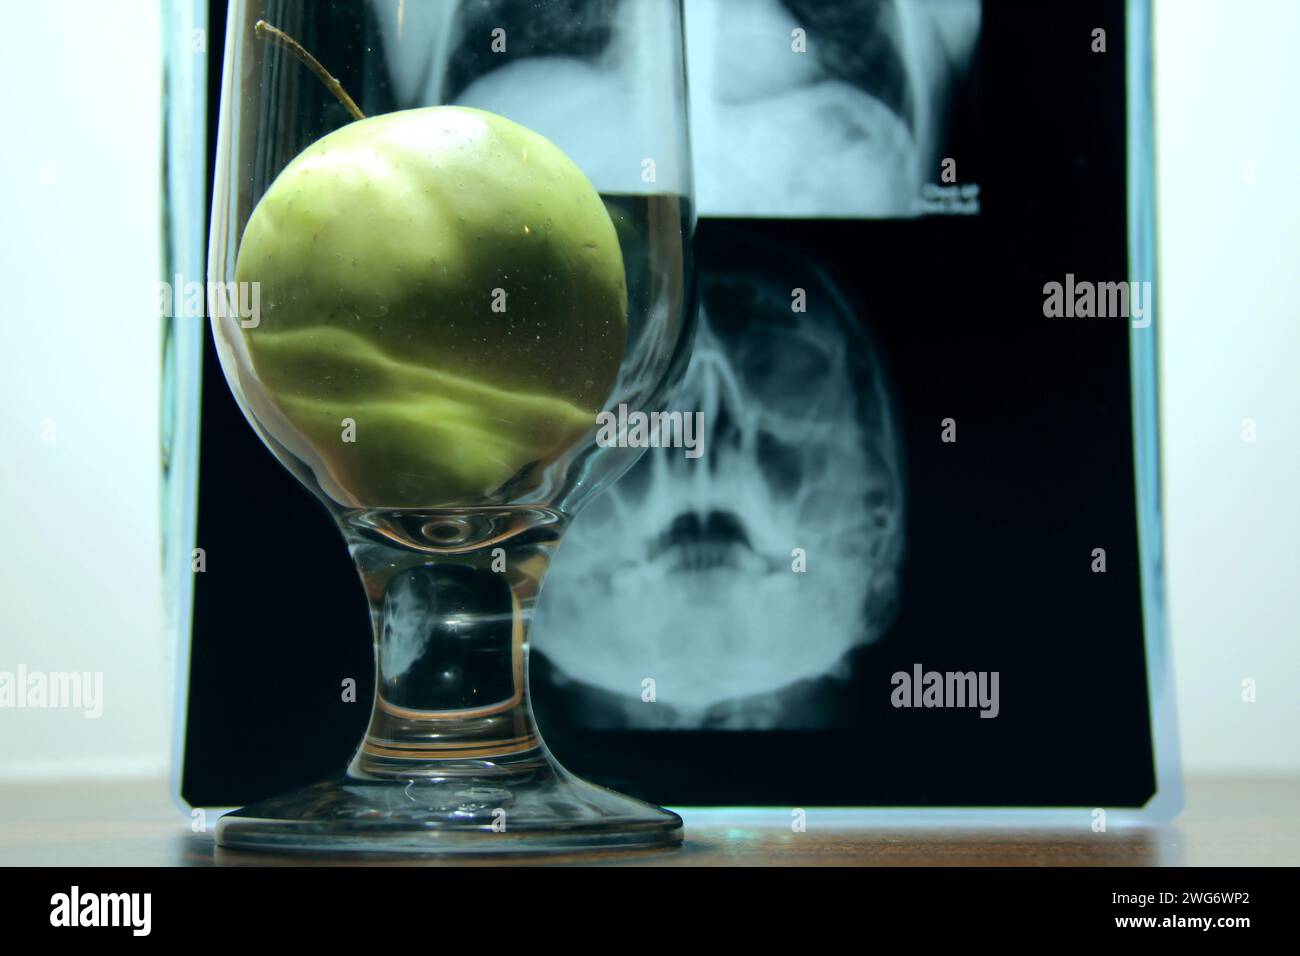 Health against diseases. Apple in clear glass over radiography image of brain disease x-ray analysis Stock Photo